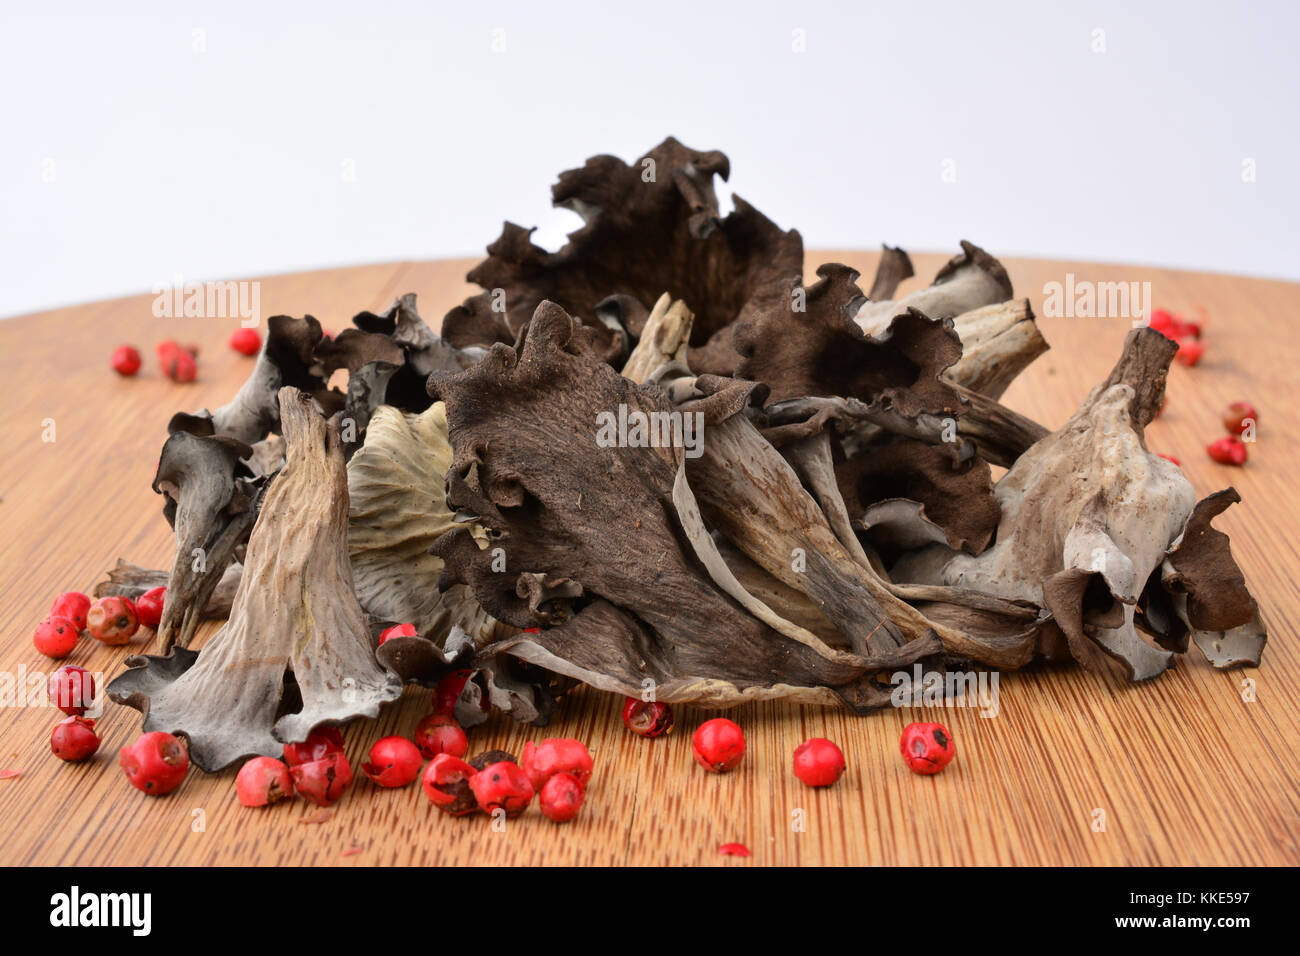 Pile of dried Horn of plenty or Craterellus cornucopioides mushrooms with spicy red pepper on bamboo wooden chopping board over white background Stock Photo